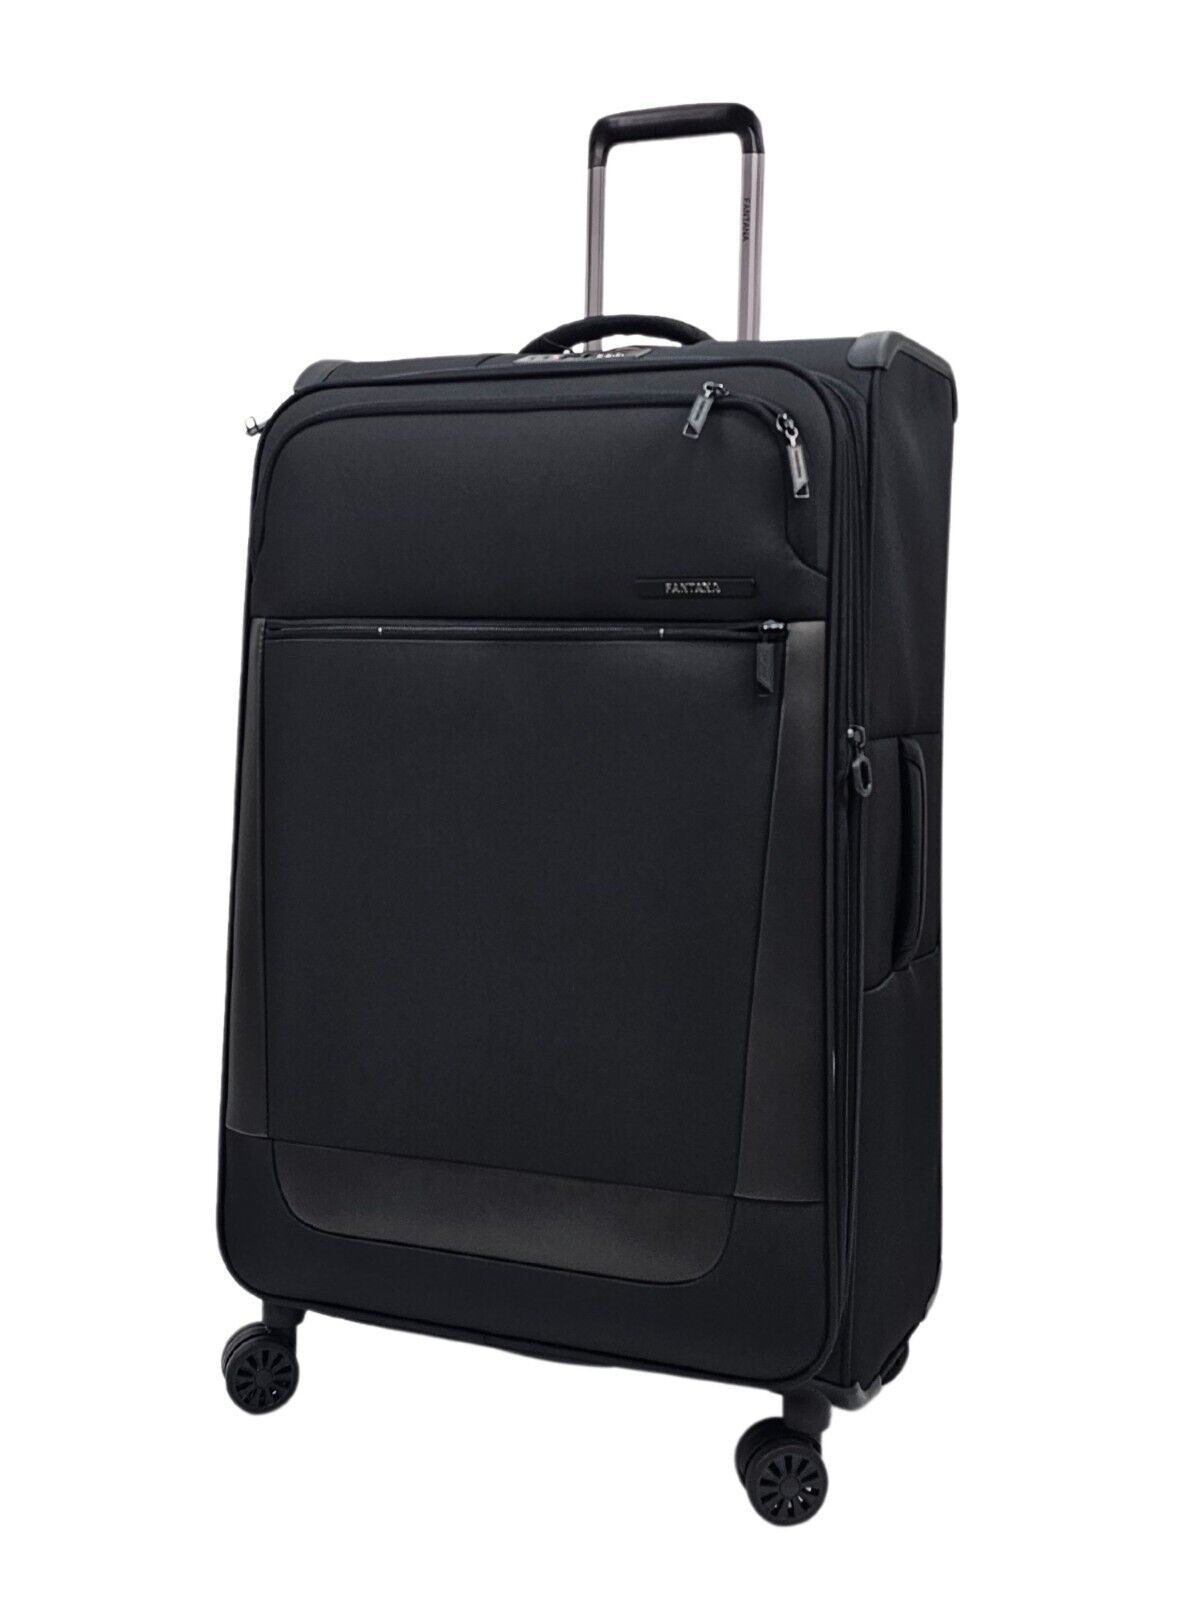 Lightweight Black Suitcases 4 Wheel Luggage Travel Cabin Bag - Upperclass Fashions 